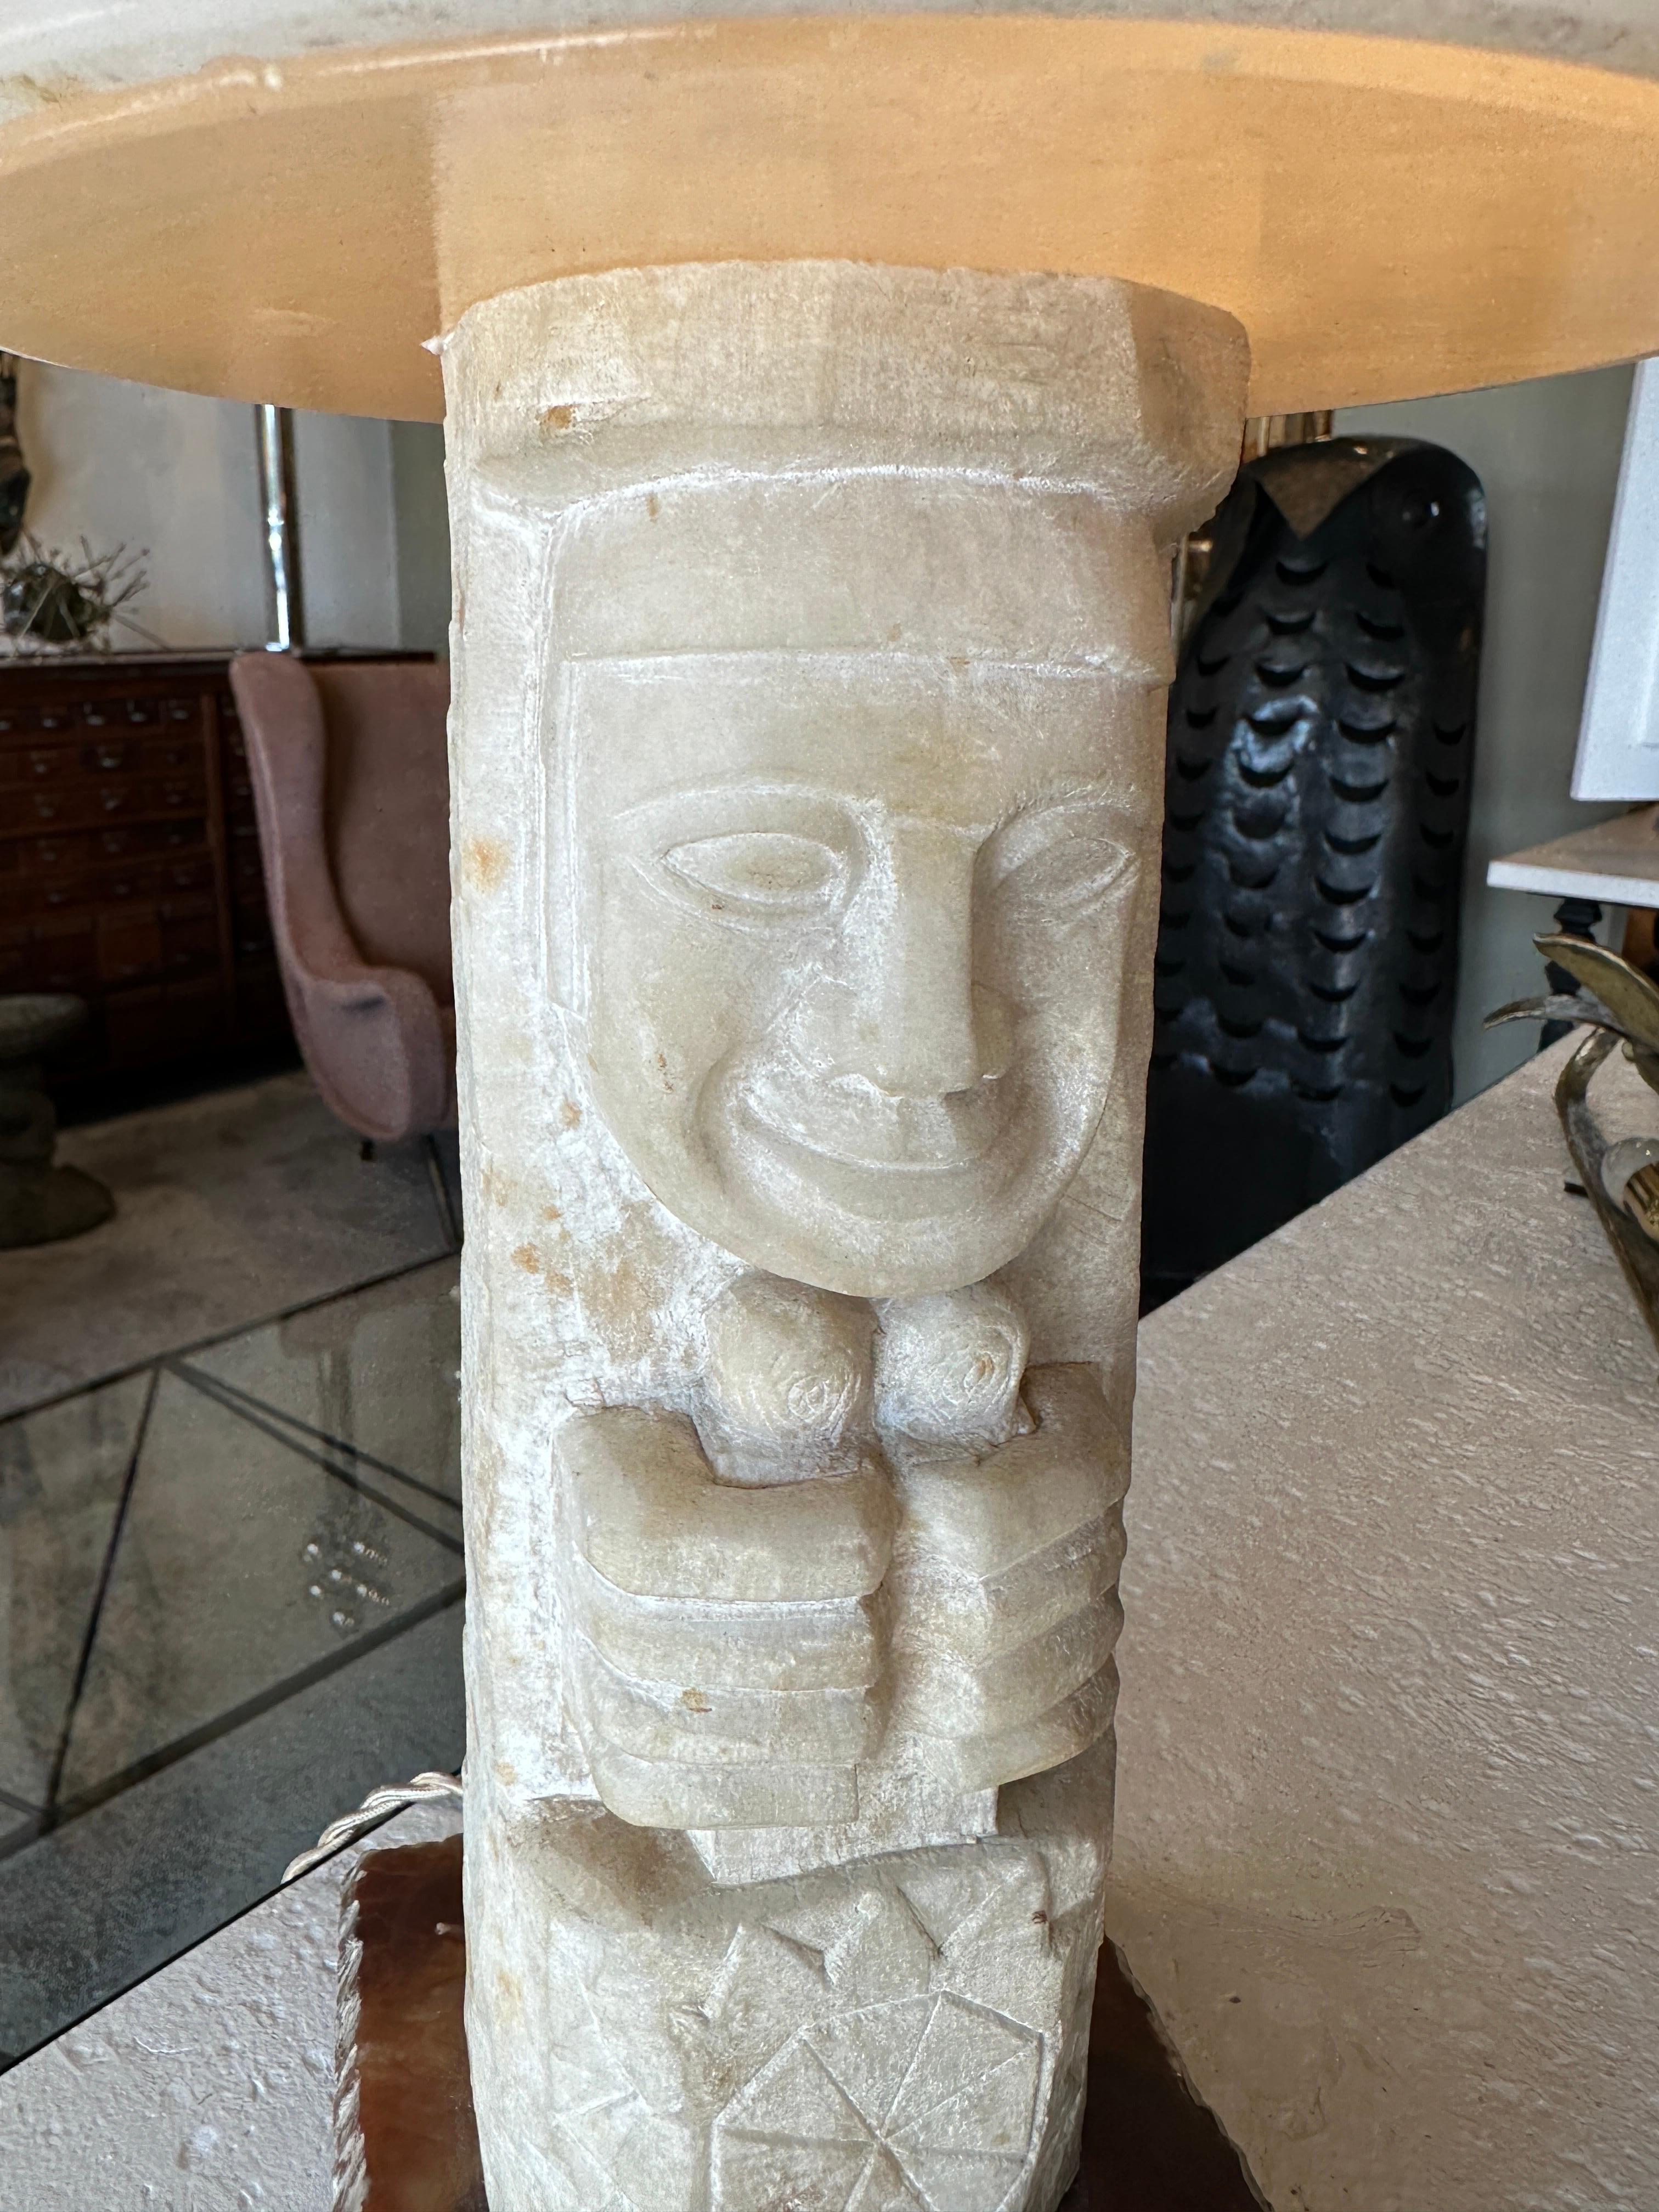 French Polynesian designed carvings on to the alabaster shade and body, this heavy and important table lamp has been professionally rewired with creamy silk cable and switch, as well as US outlet plug. A primitive Polynesian tribal design on a late